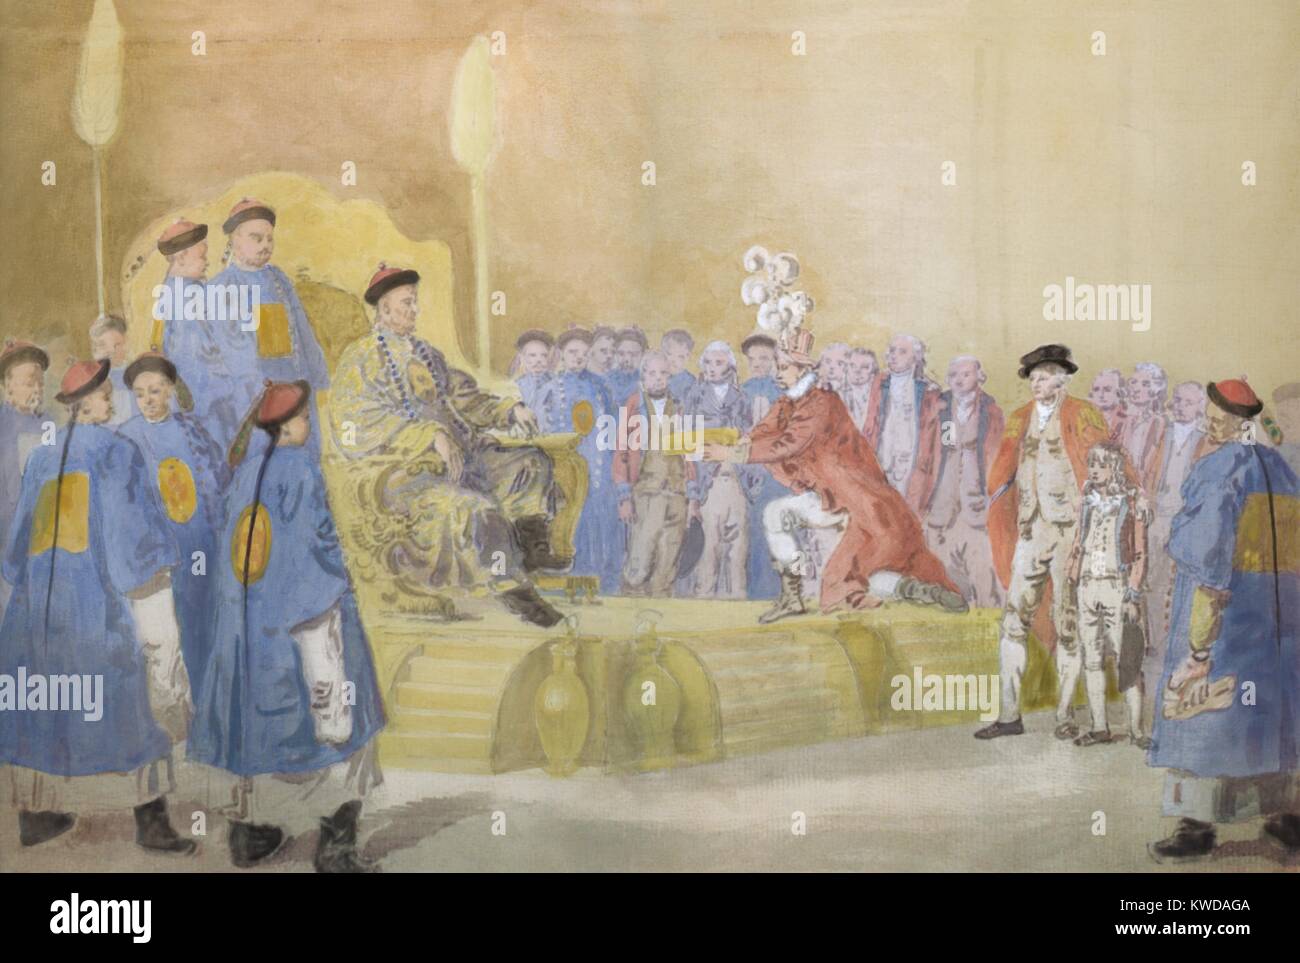 British Ambassador George MacCartney kneeling before the Qianlong Emperor of China, Sept 14, 1793. Standing behind the Emperor is Viceroy Liang Kentang and the future Jiaqing Emperor. To MacCartney's left are George Staunton and his Chinese speaking son, (BSLOC 2016 9 1)DUPLICATE REMOVED: SHOULD HAVE BEEN '7 Continents History', AS PER Barbara Schultz - DD Stock Photo